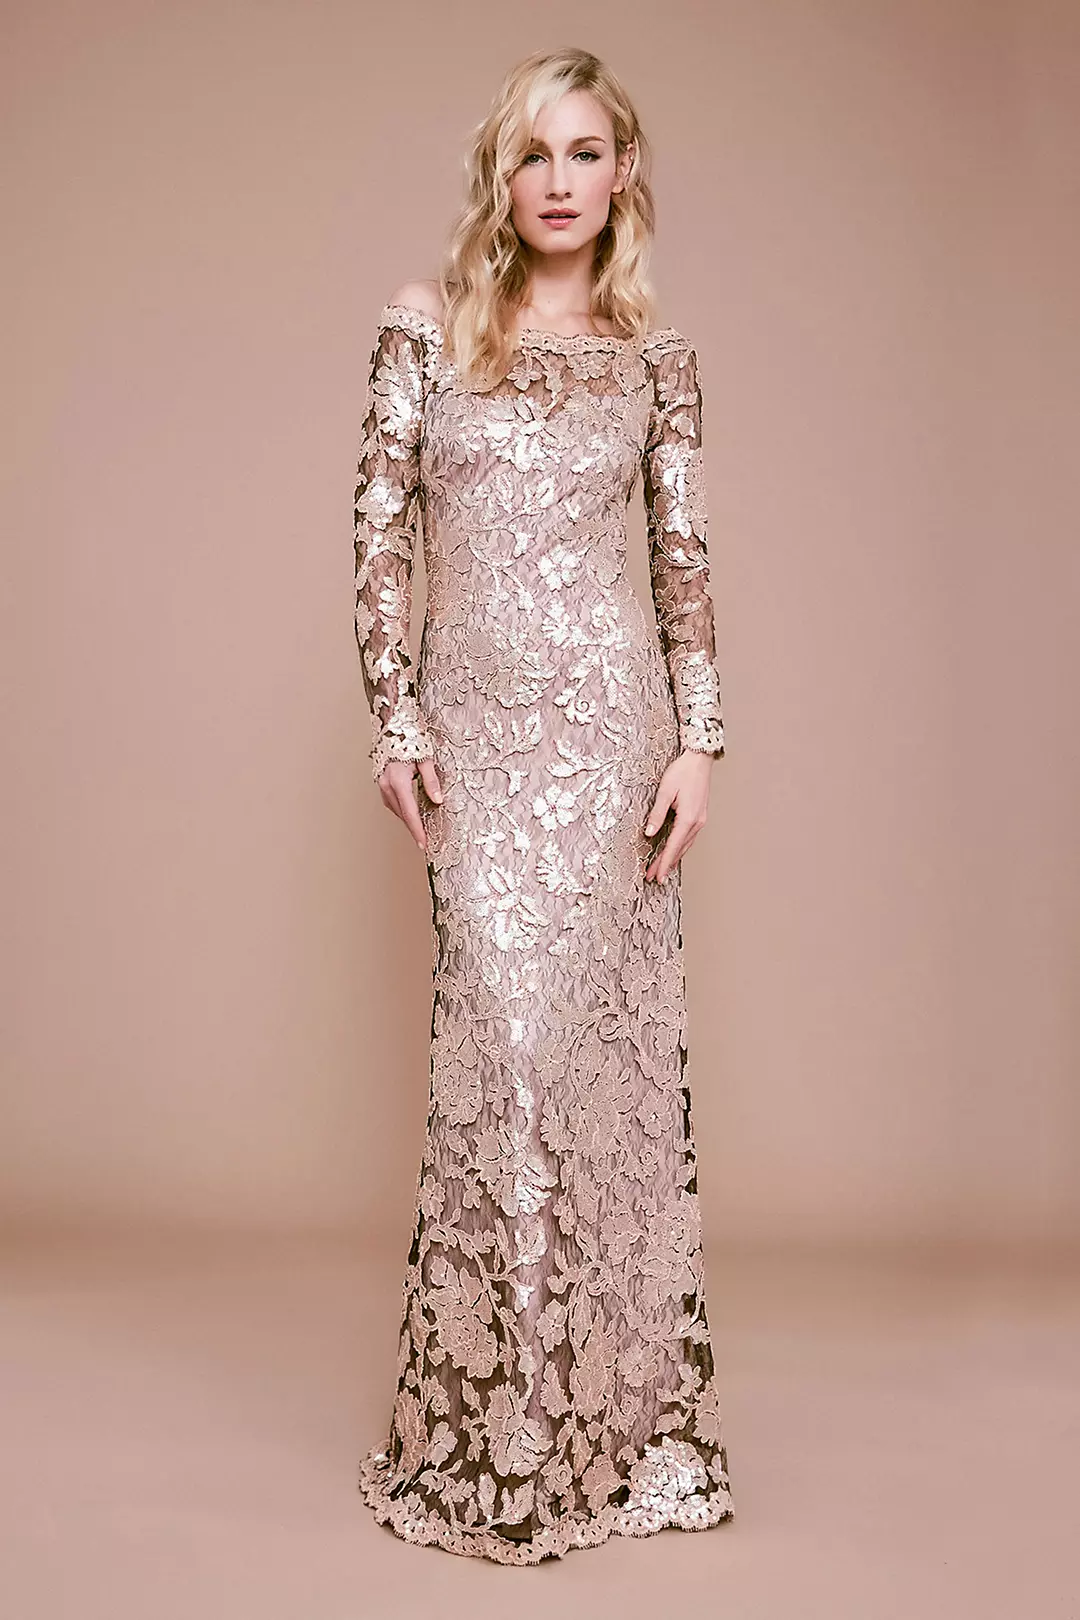 Ophelia Long Sleeve Sequin Applique Lace Gown Image